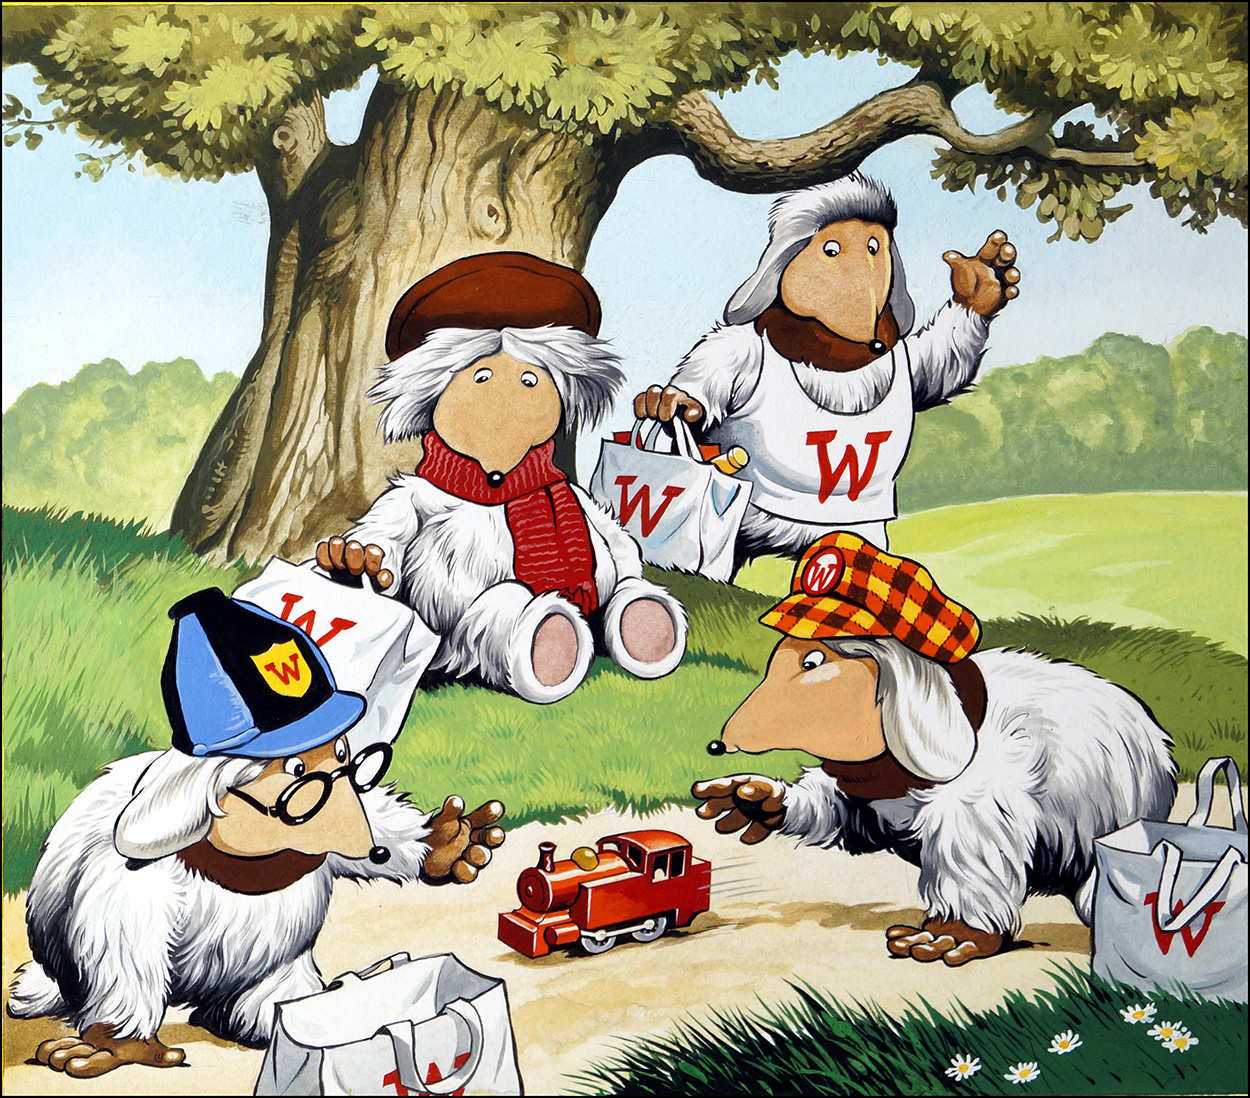 The Wombles - Model Train (Original) art by The Wombles (Blasco) at The Illustration Art Gallery